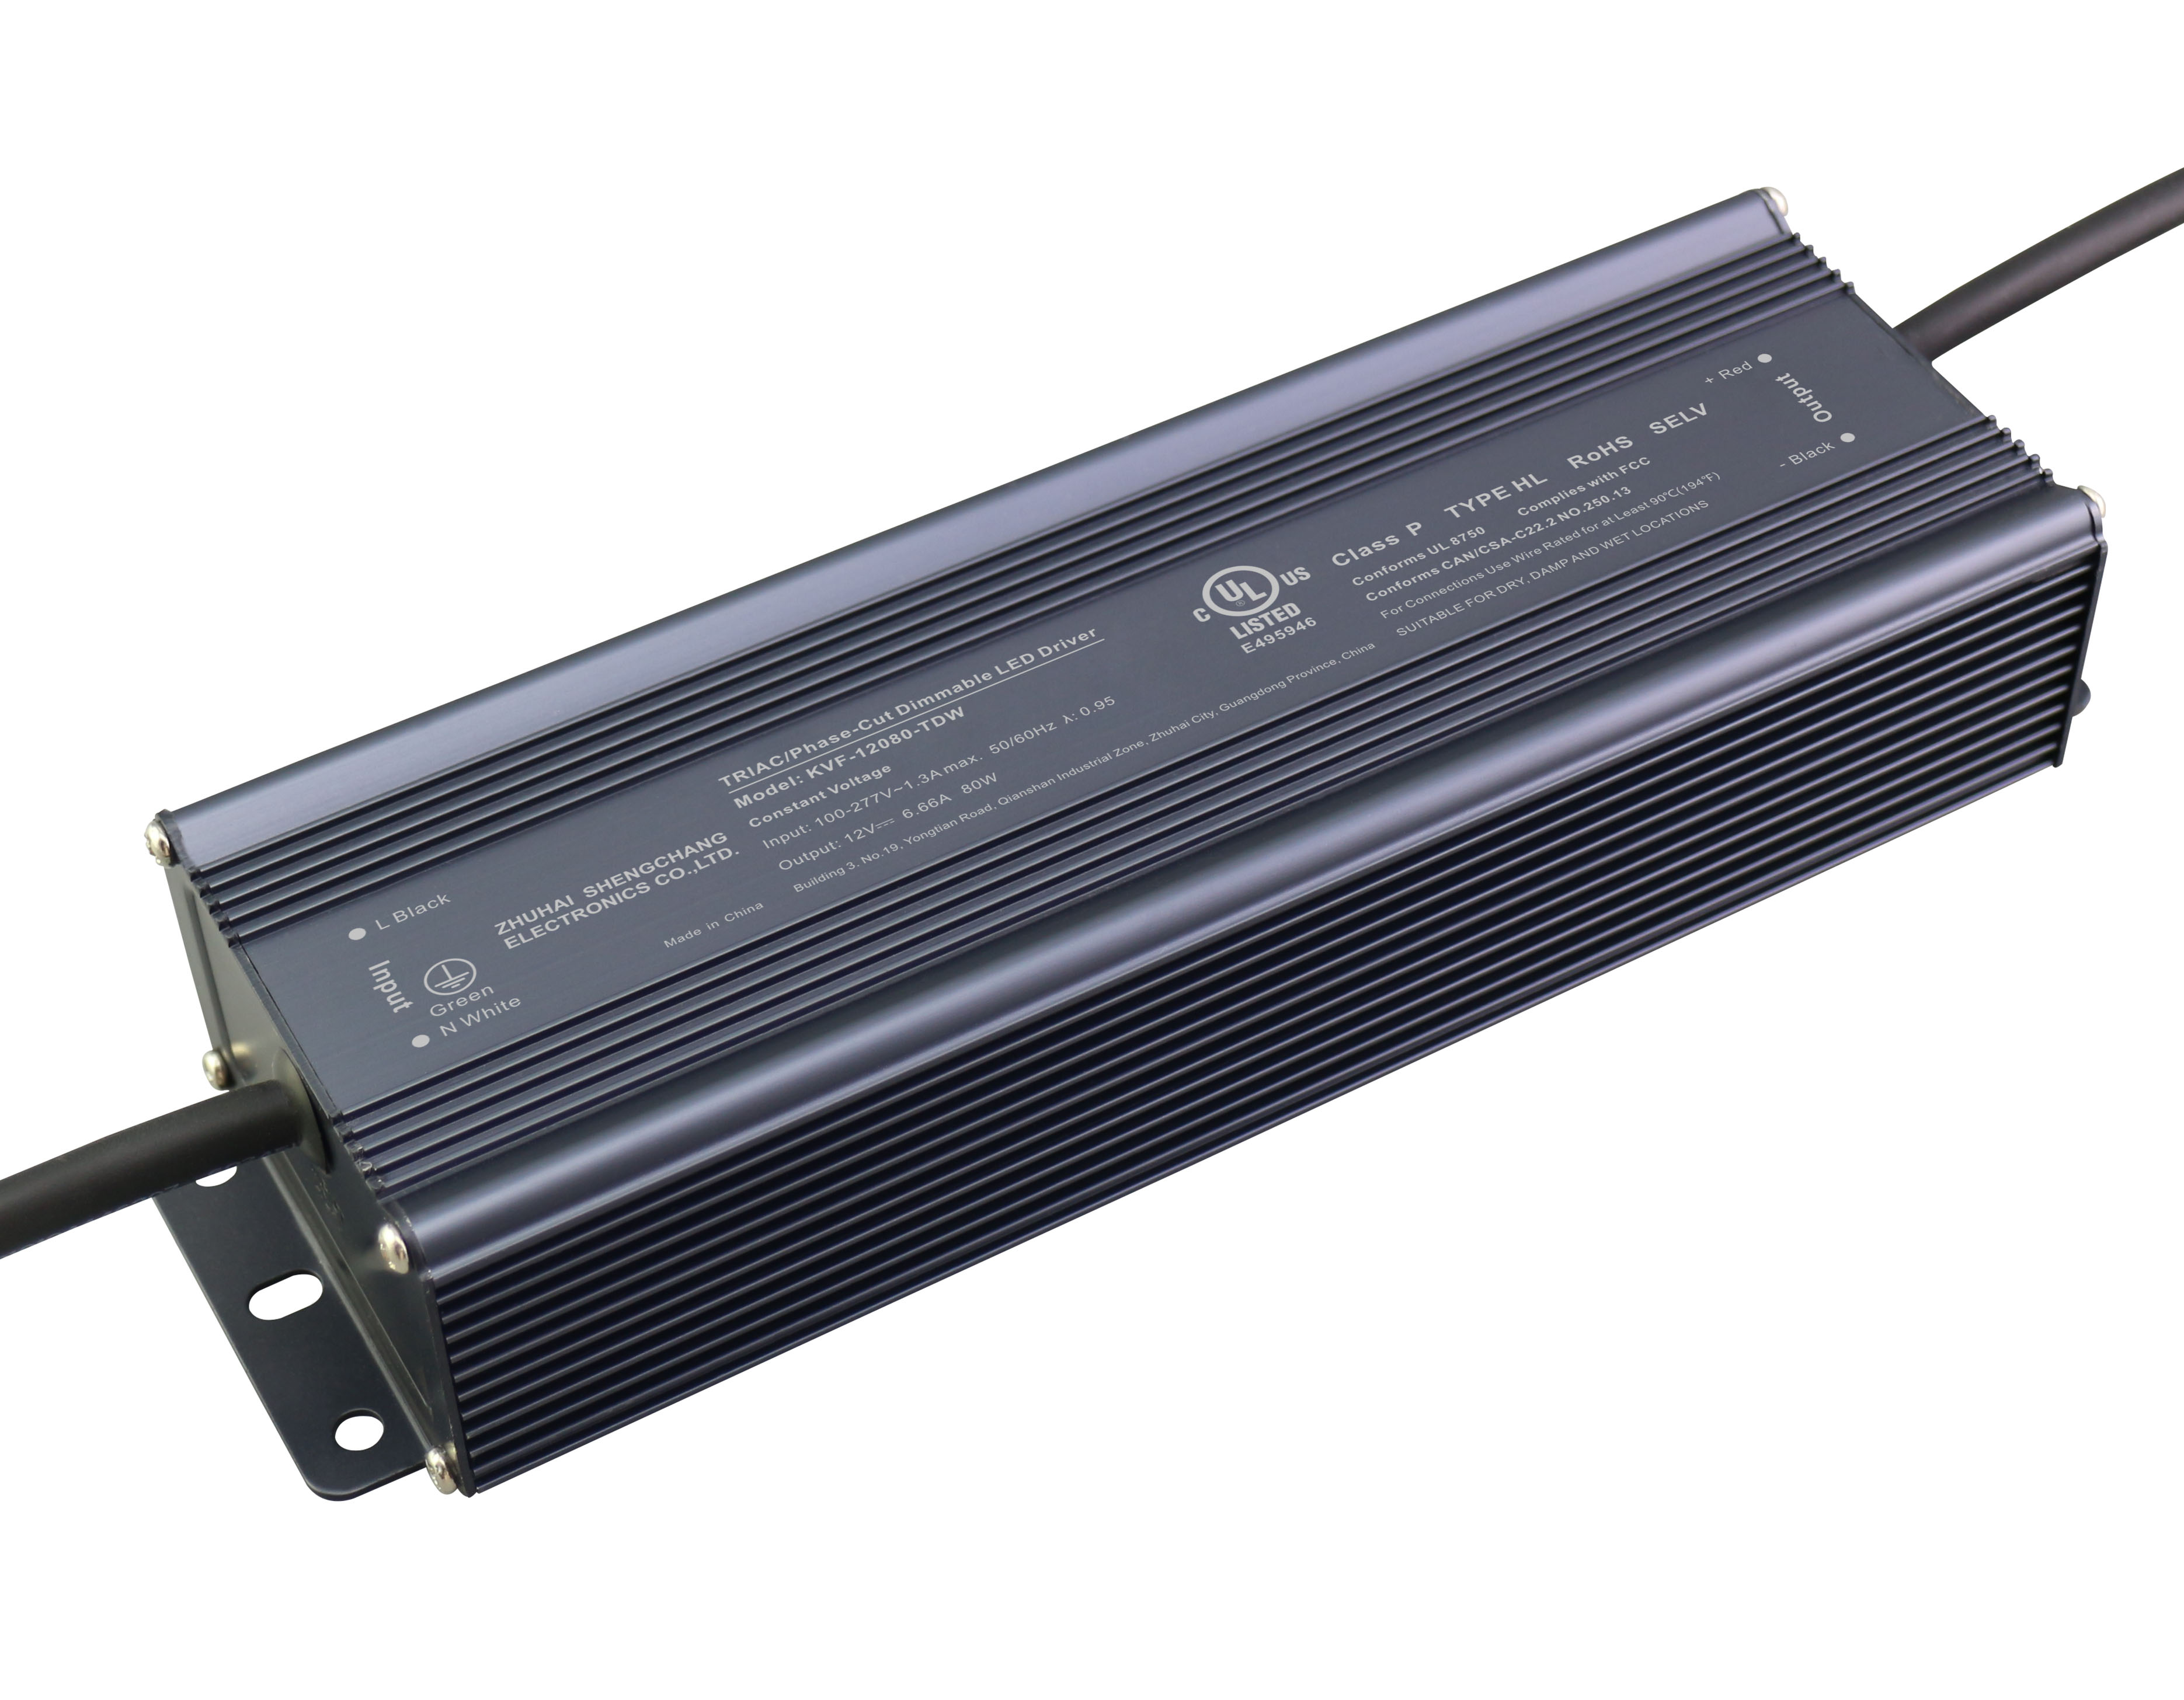 KVG-DW Series 80W Constant Voltage Triac&0/1-10V Dimmable LED driver